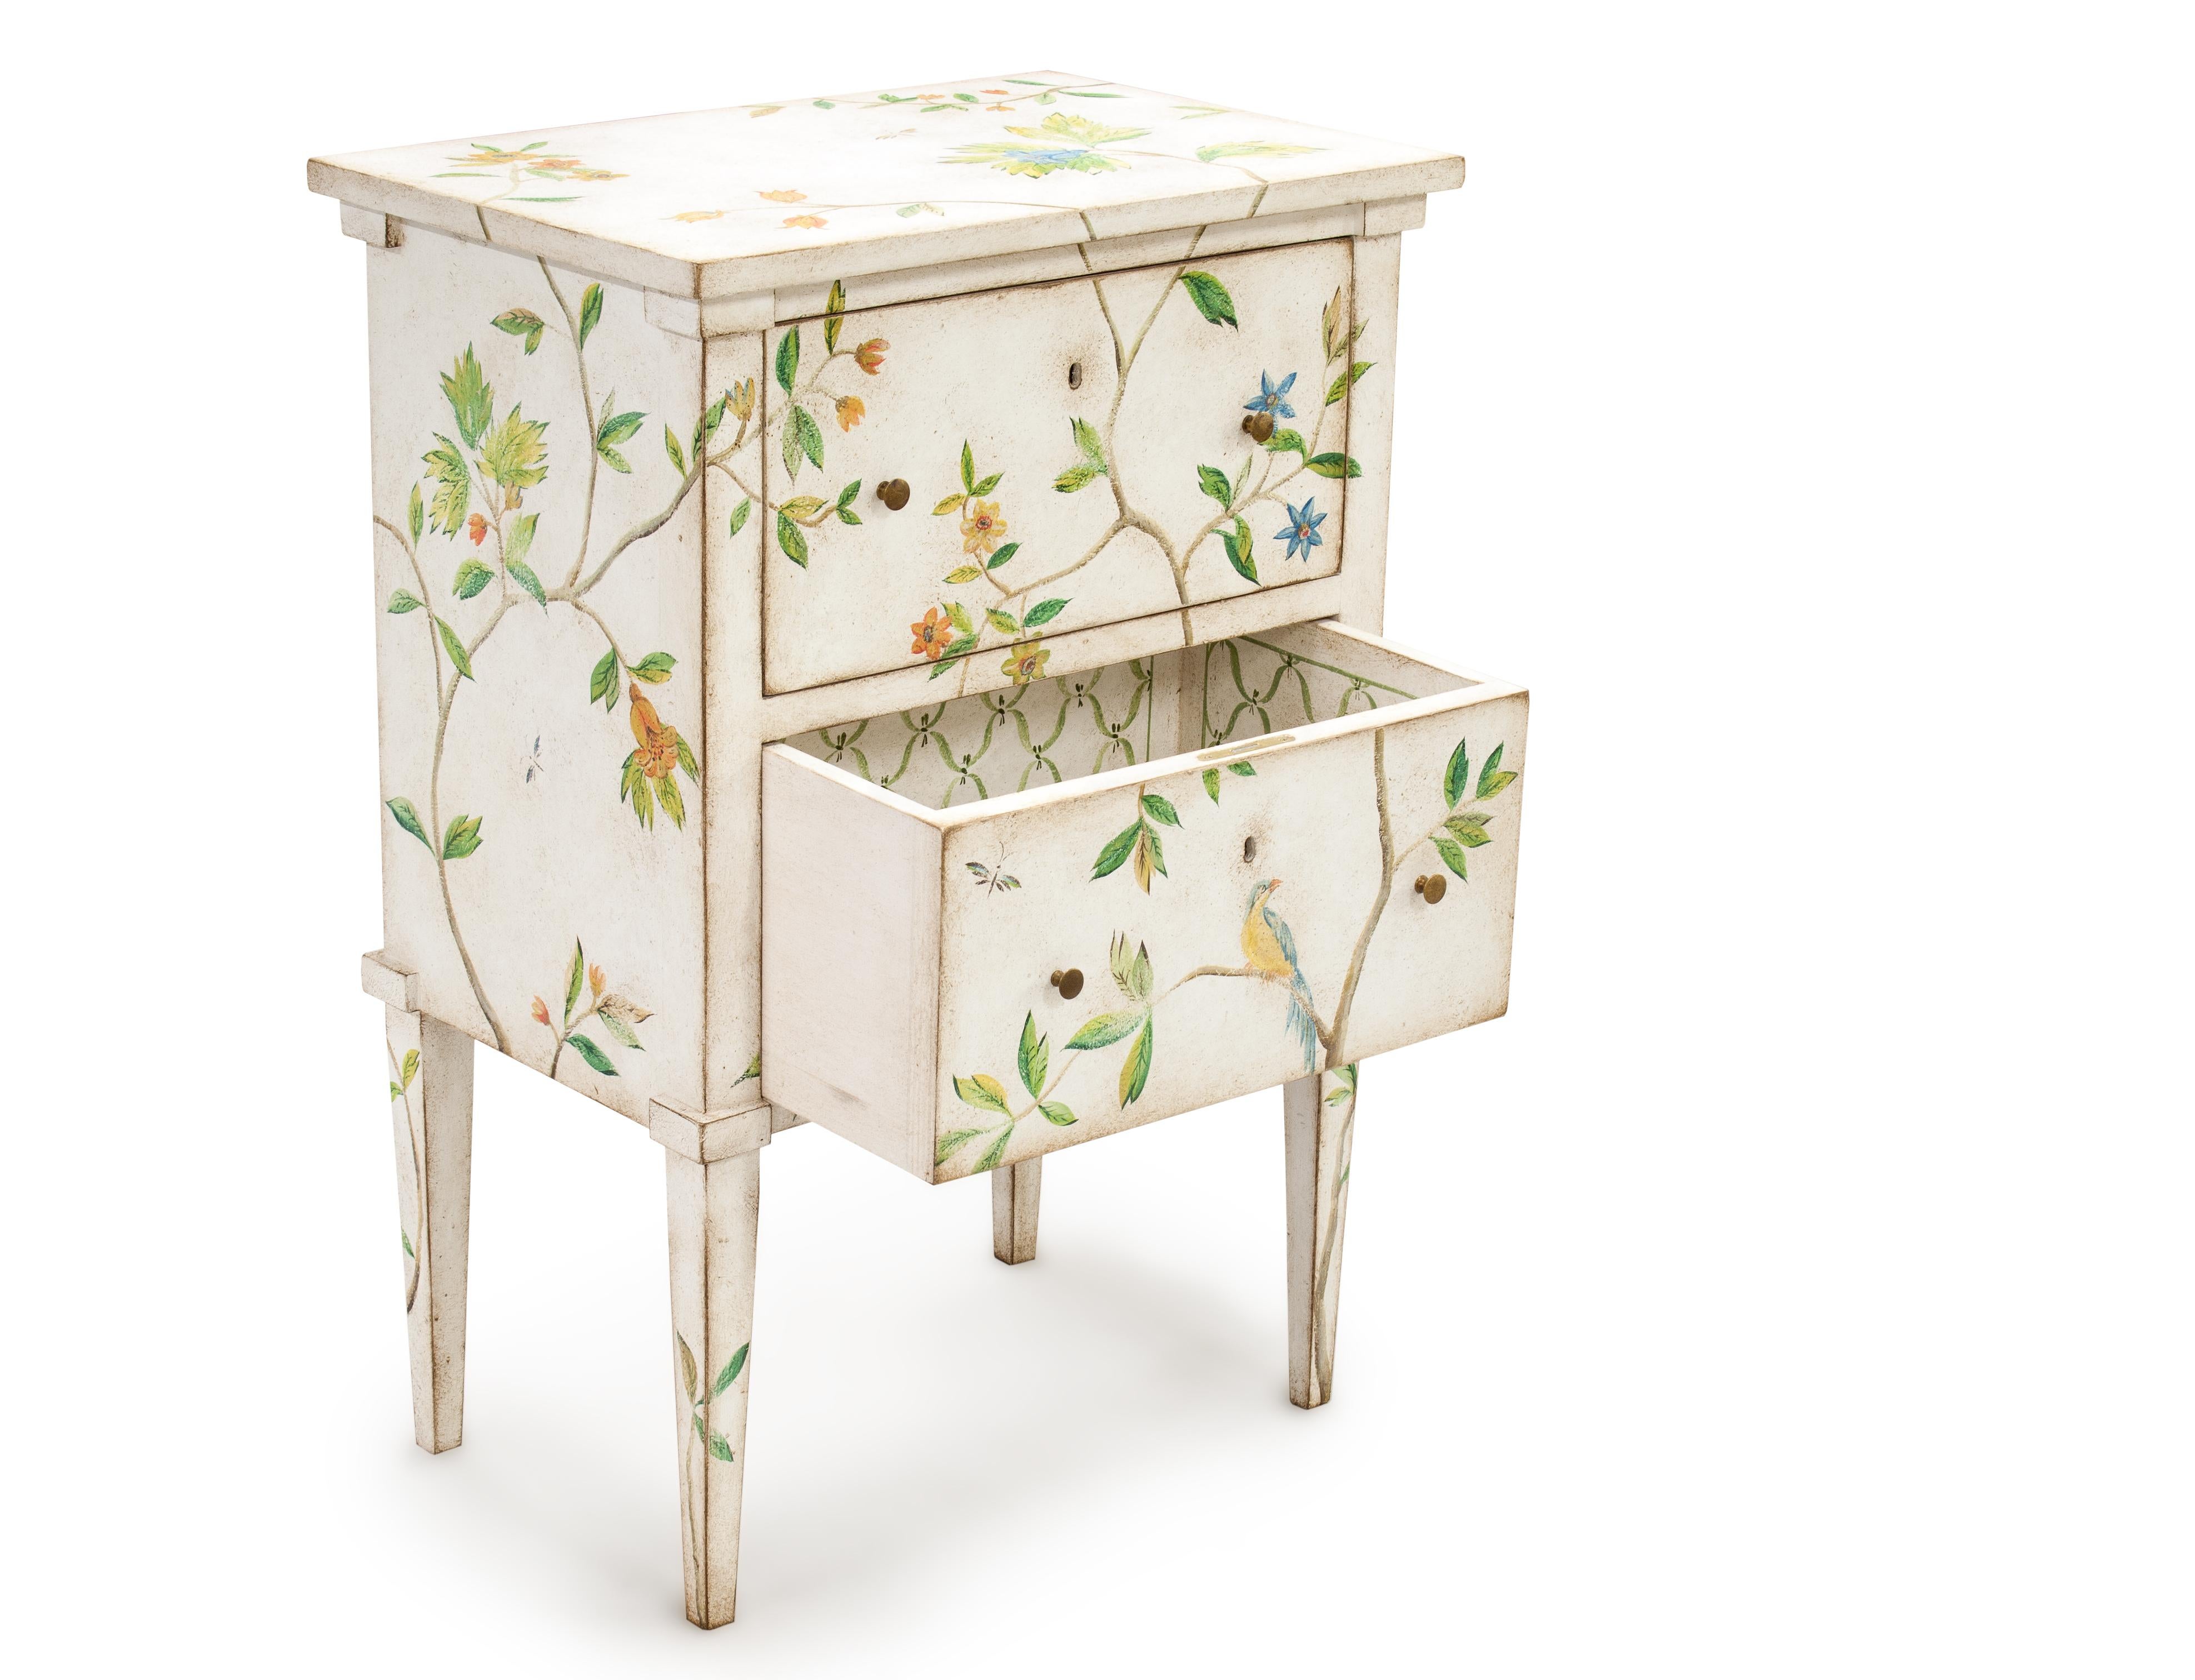 From our Hand-Painted Furniture Collection, we are pleased to introduce you to our Lombardia Nightstand.
Timeless frame with solid, contemporary lines rivisited with our whimsical foliage decor with blooming flowers and perched birds, all in a sweet